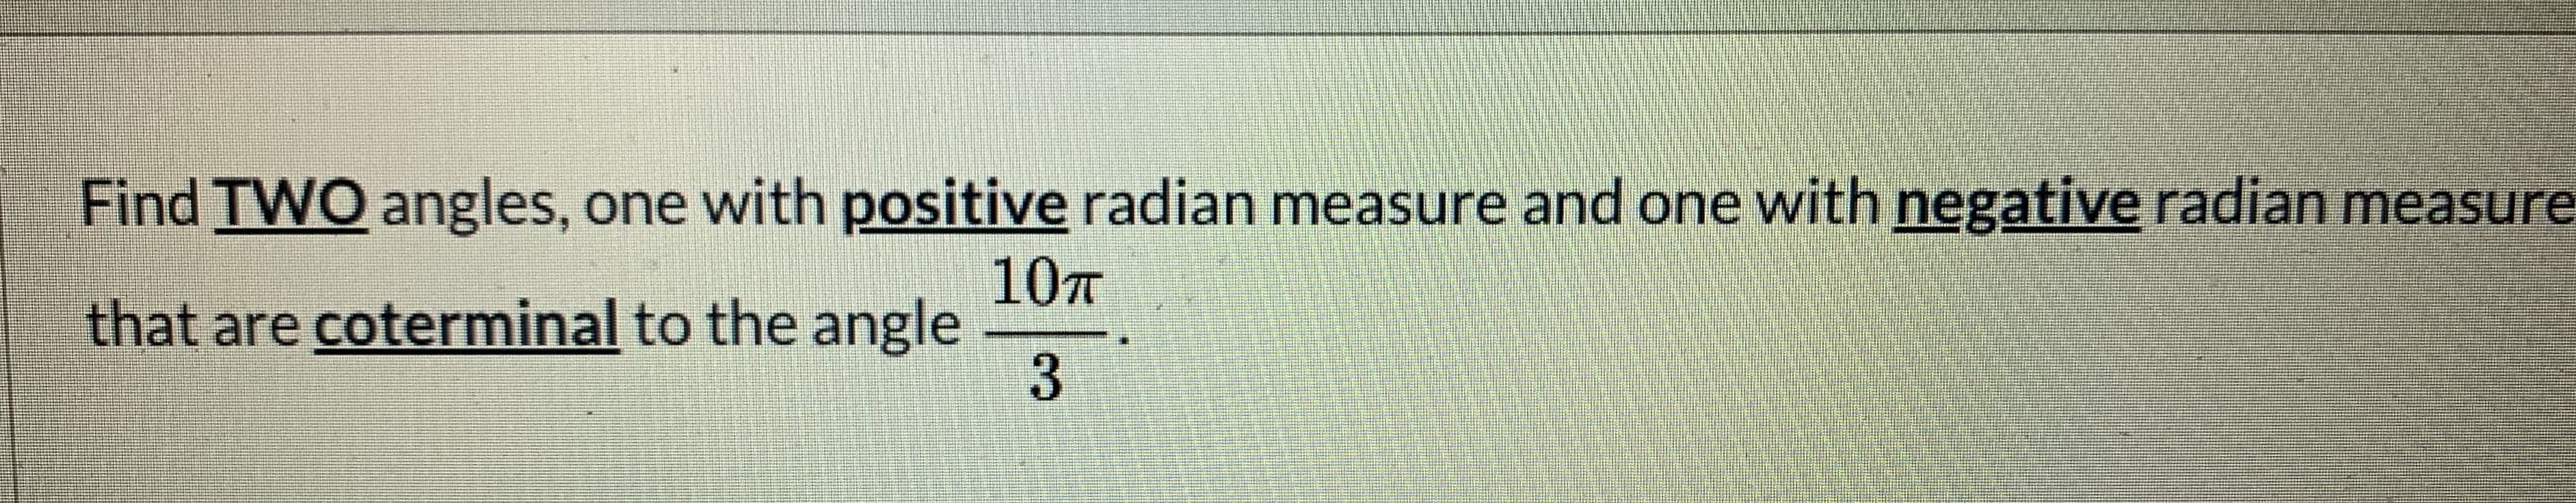 Find TWO angles, one with positive radian measure and one with negative radian measure
107
that are coterminal to the angle
3.
